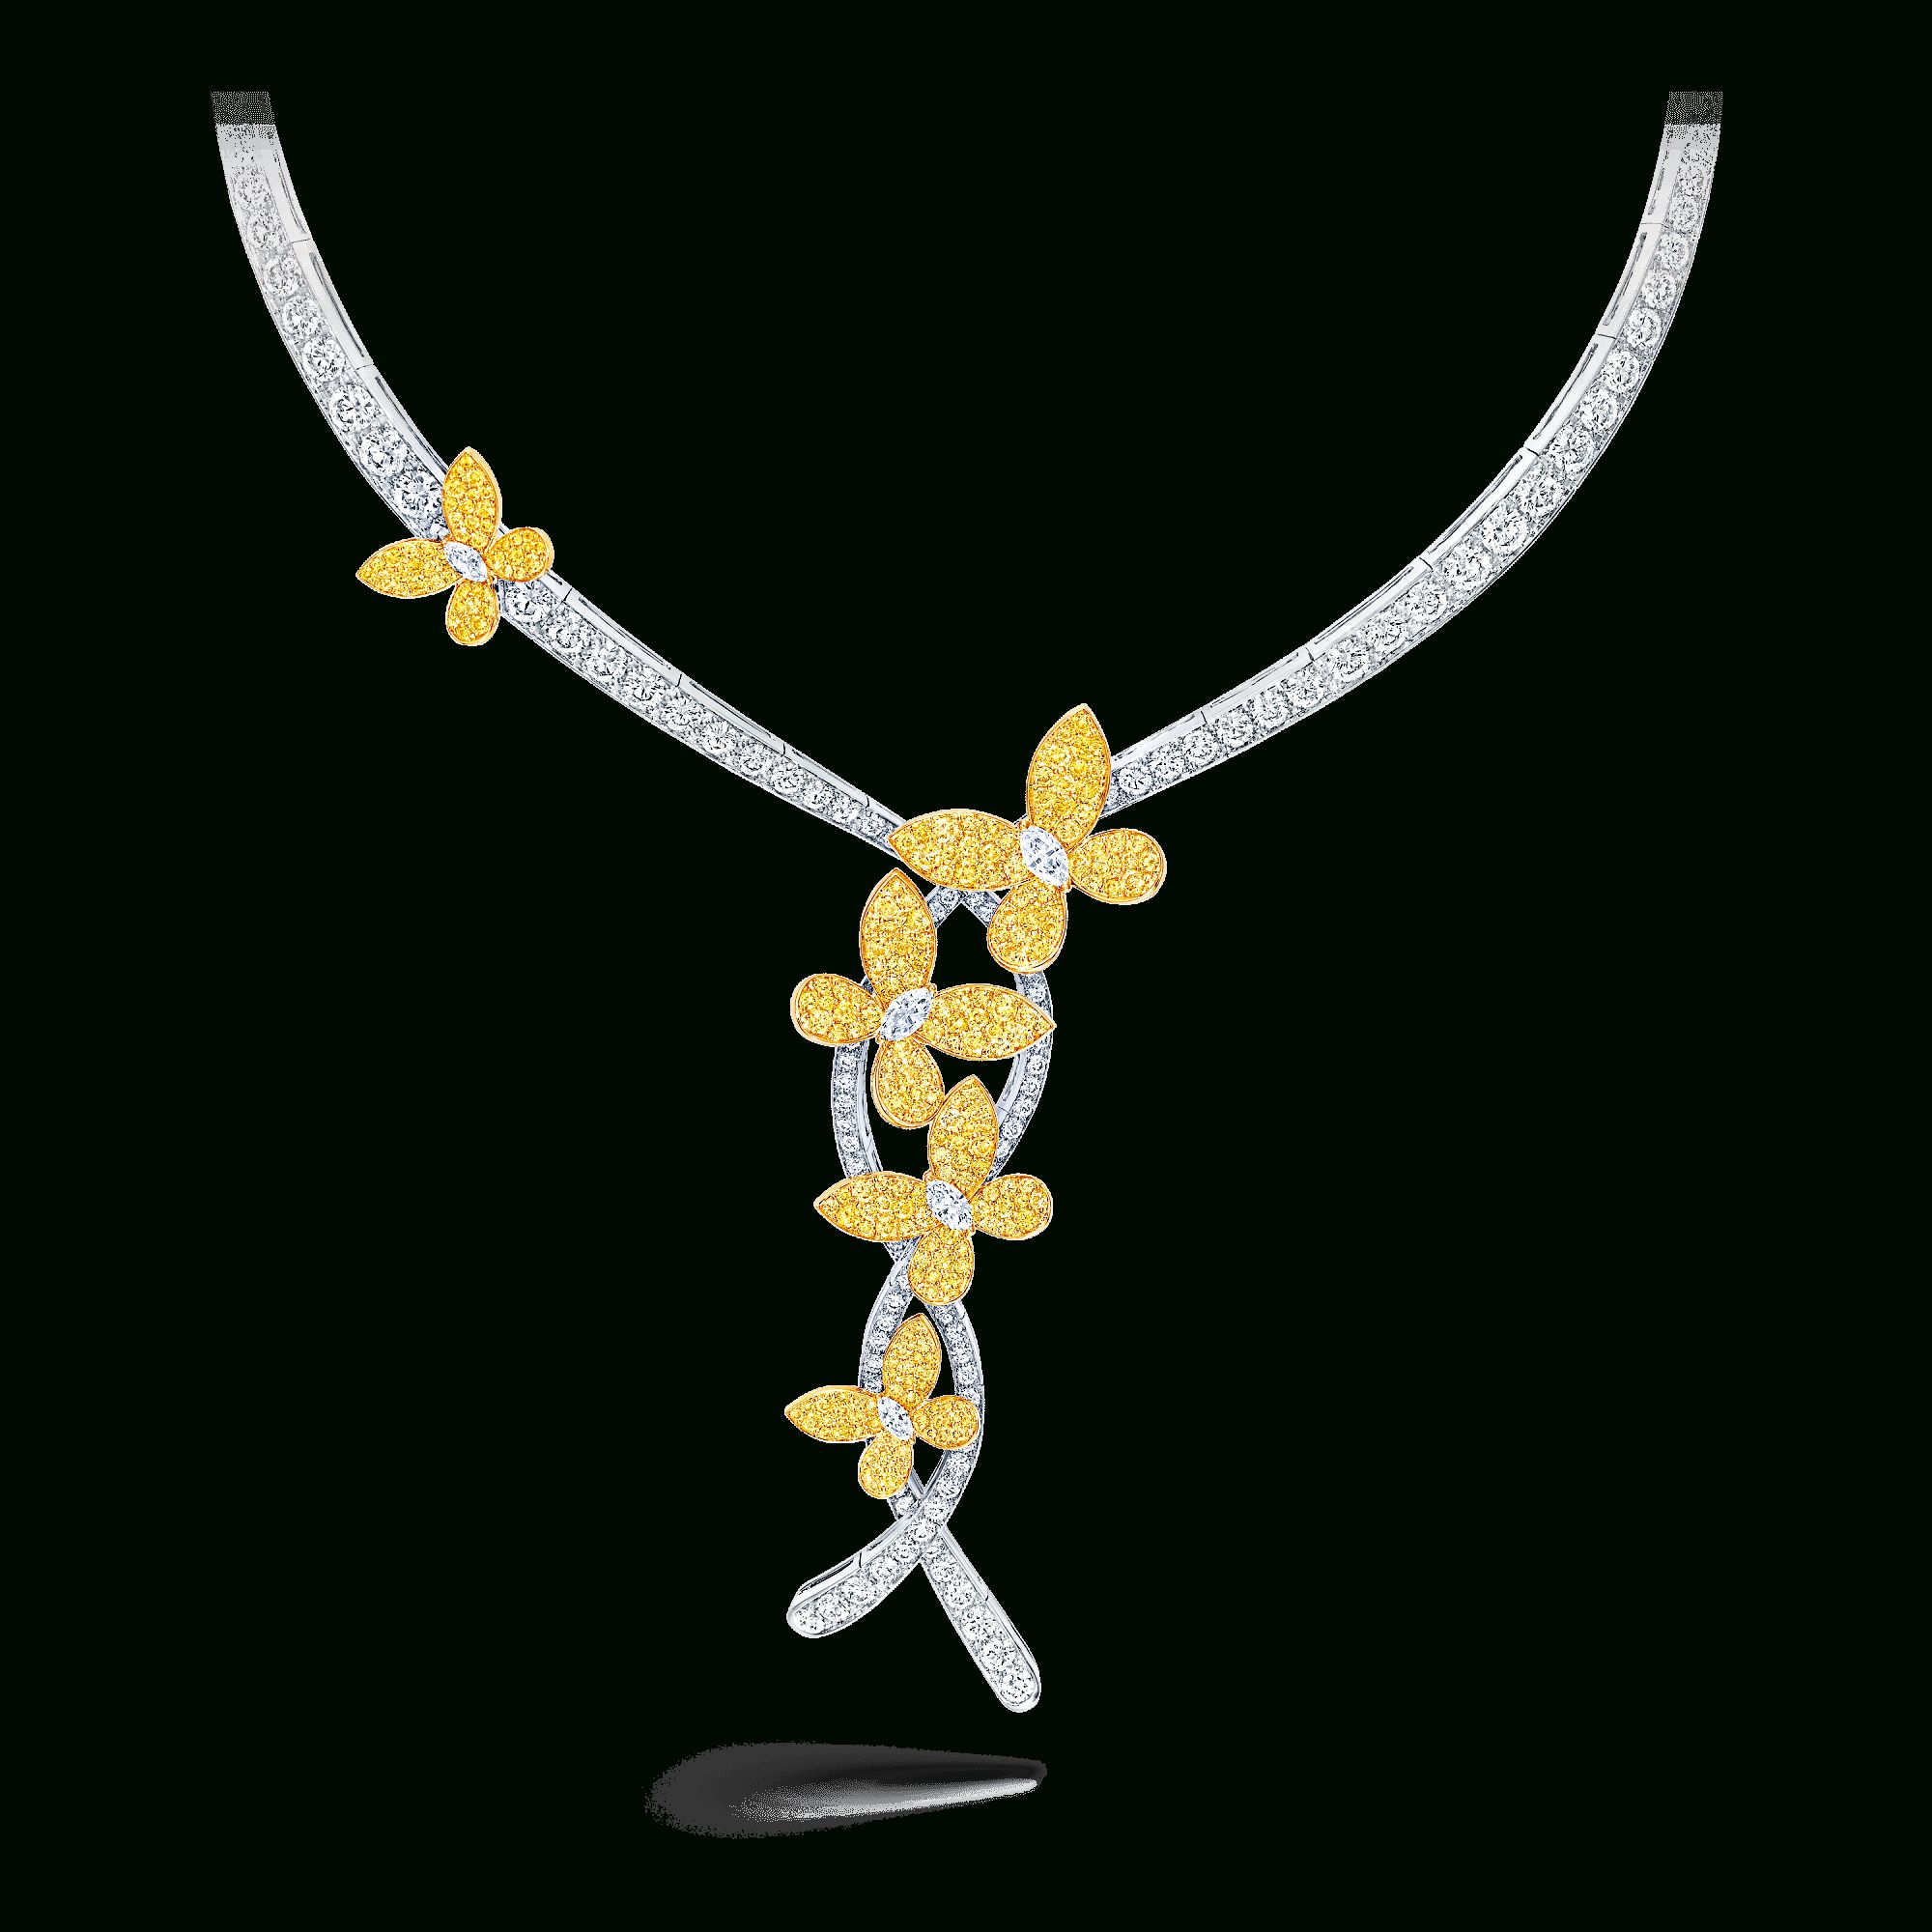 Triple Pavé Butterfly Necklace, Yellow And White Diamond | Graff Intended For Recent Pavé Butterfly Pendant Necklaces (View 23 of 25)